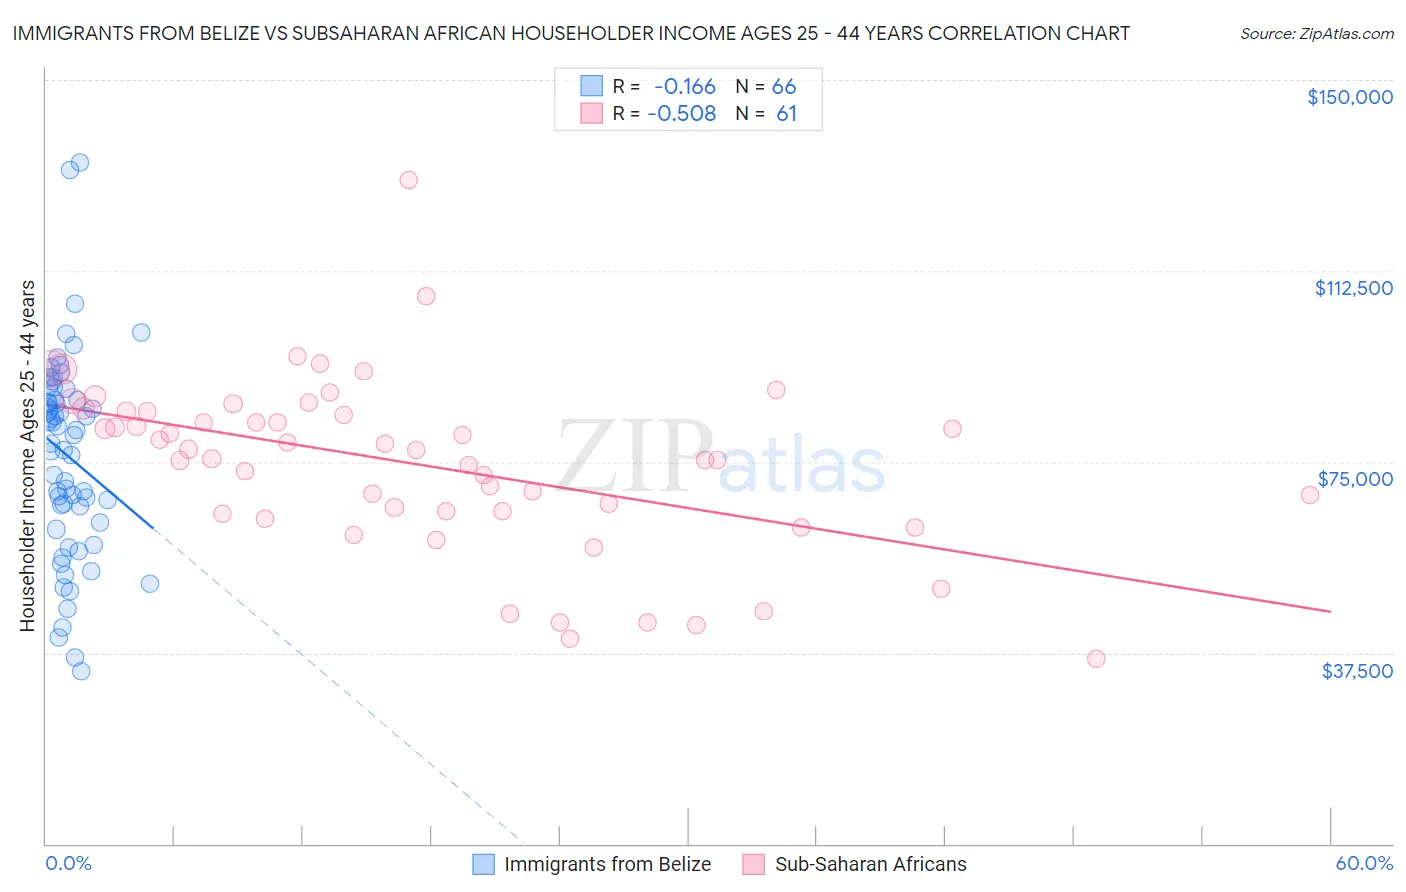 Immigrants from Belize vs Subsaharan African Householder Income Ages 25 - 44 years